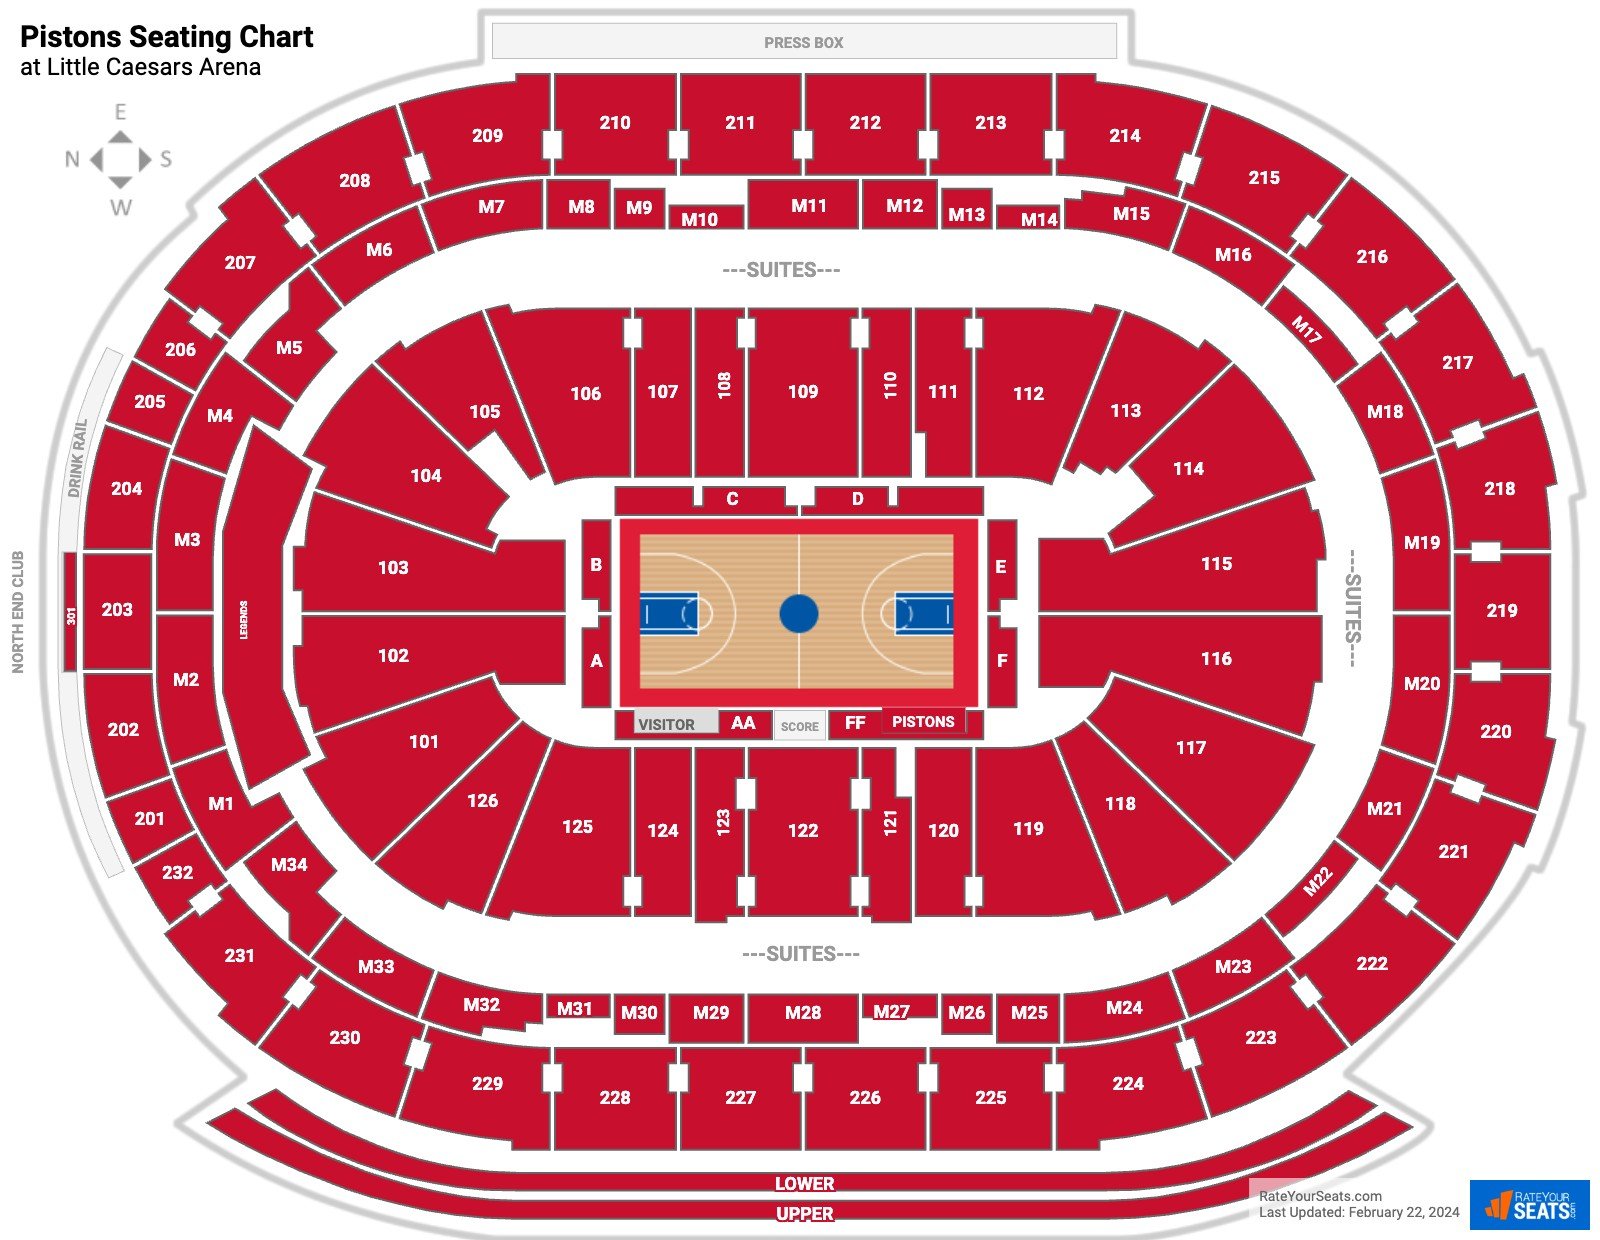 Detroit Pistons Seating Chart at Little Caesars Arena